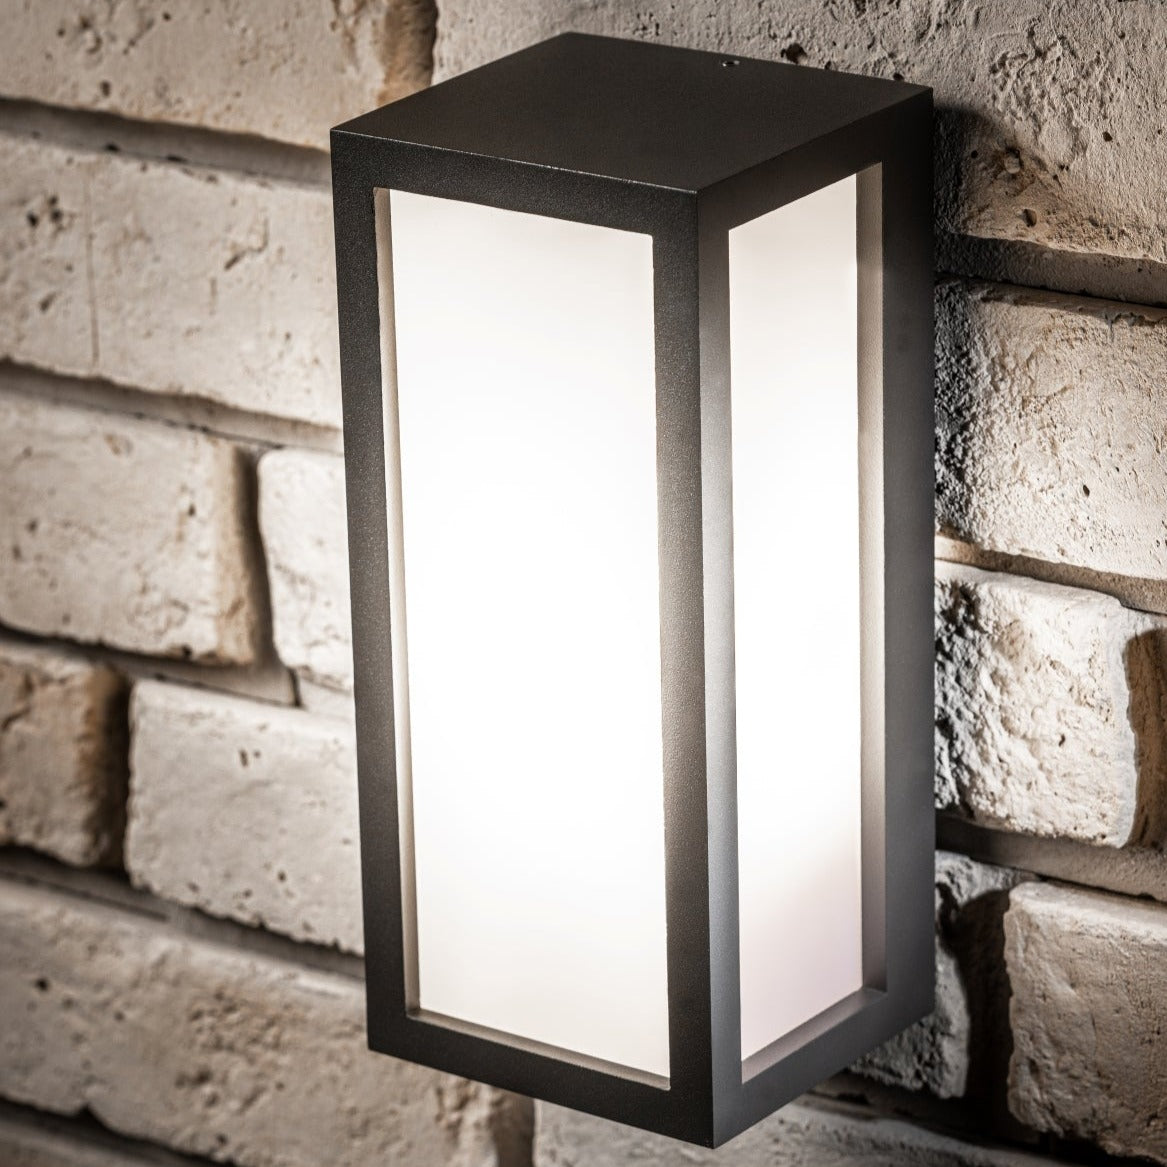 If you’re looking for a modern take on a traditional outdoor wall light, this black aluminium rectangle wall light is perfect for adding style and protection for your home. This classic design with a contemporary twist, styled with a metal rectangle shape and fitted with opal diffusers also contains an imposing black finish, making it ideal for any home design - adding a statement to any wall it fits in